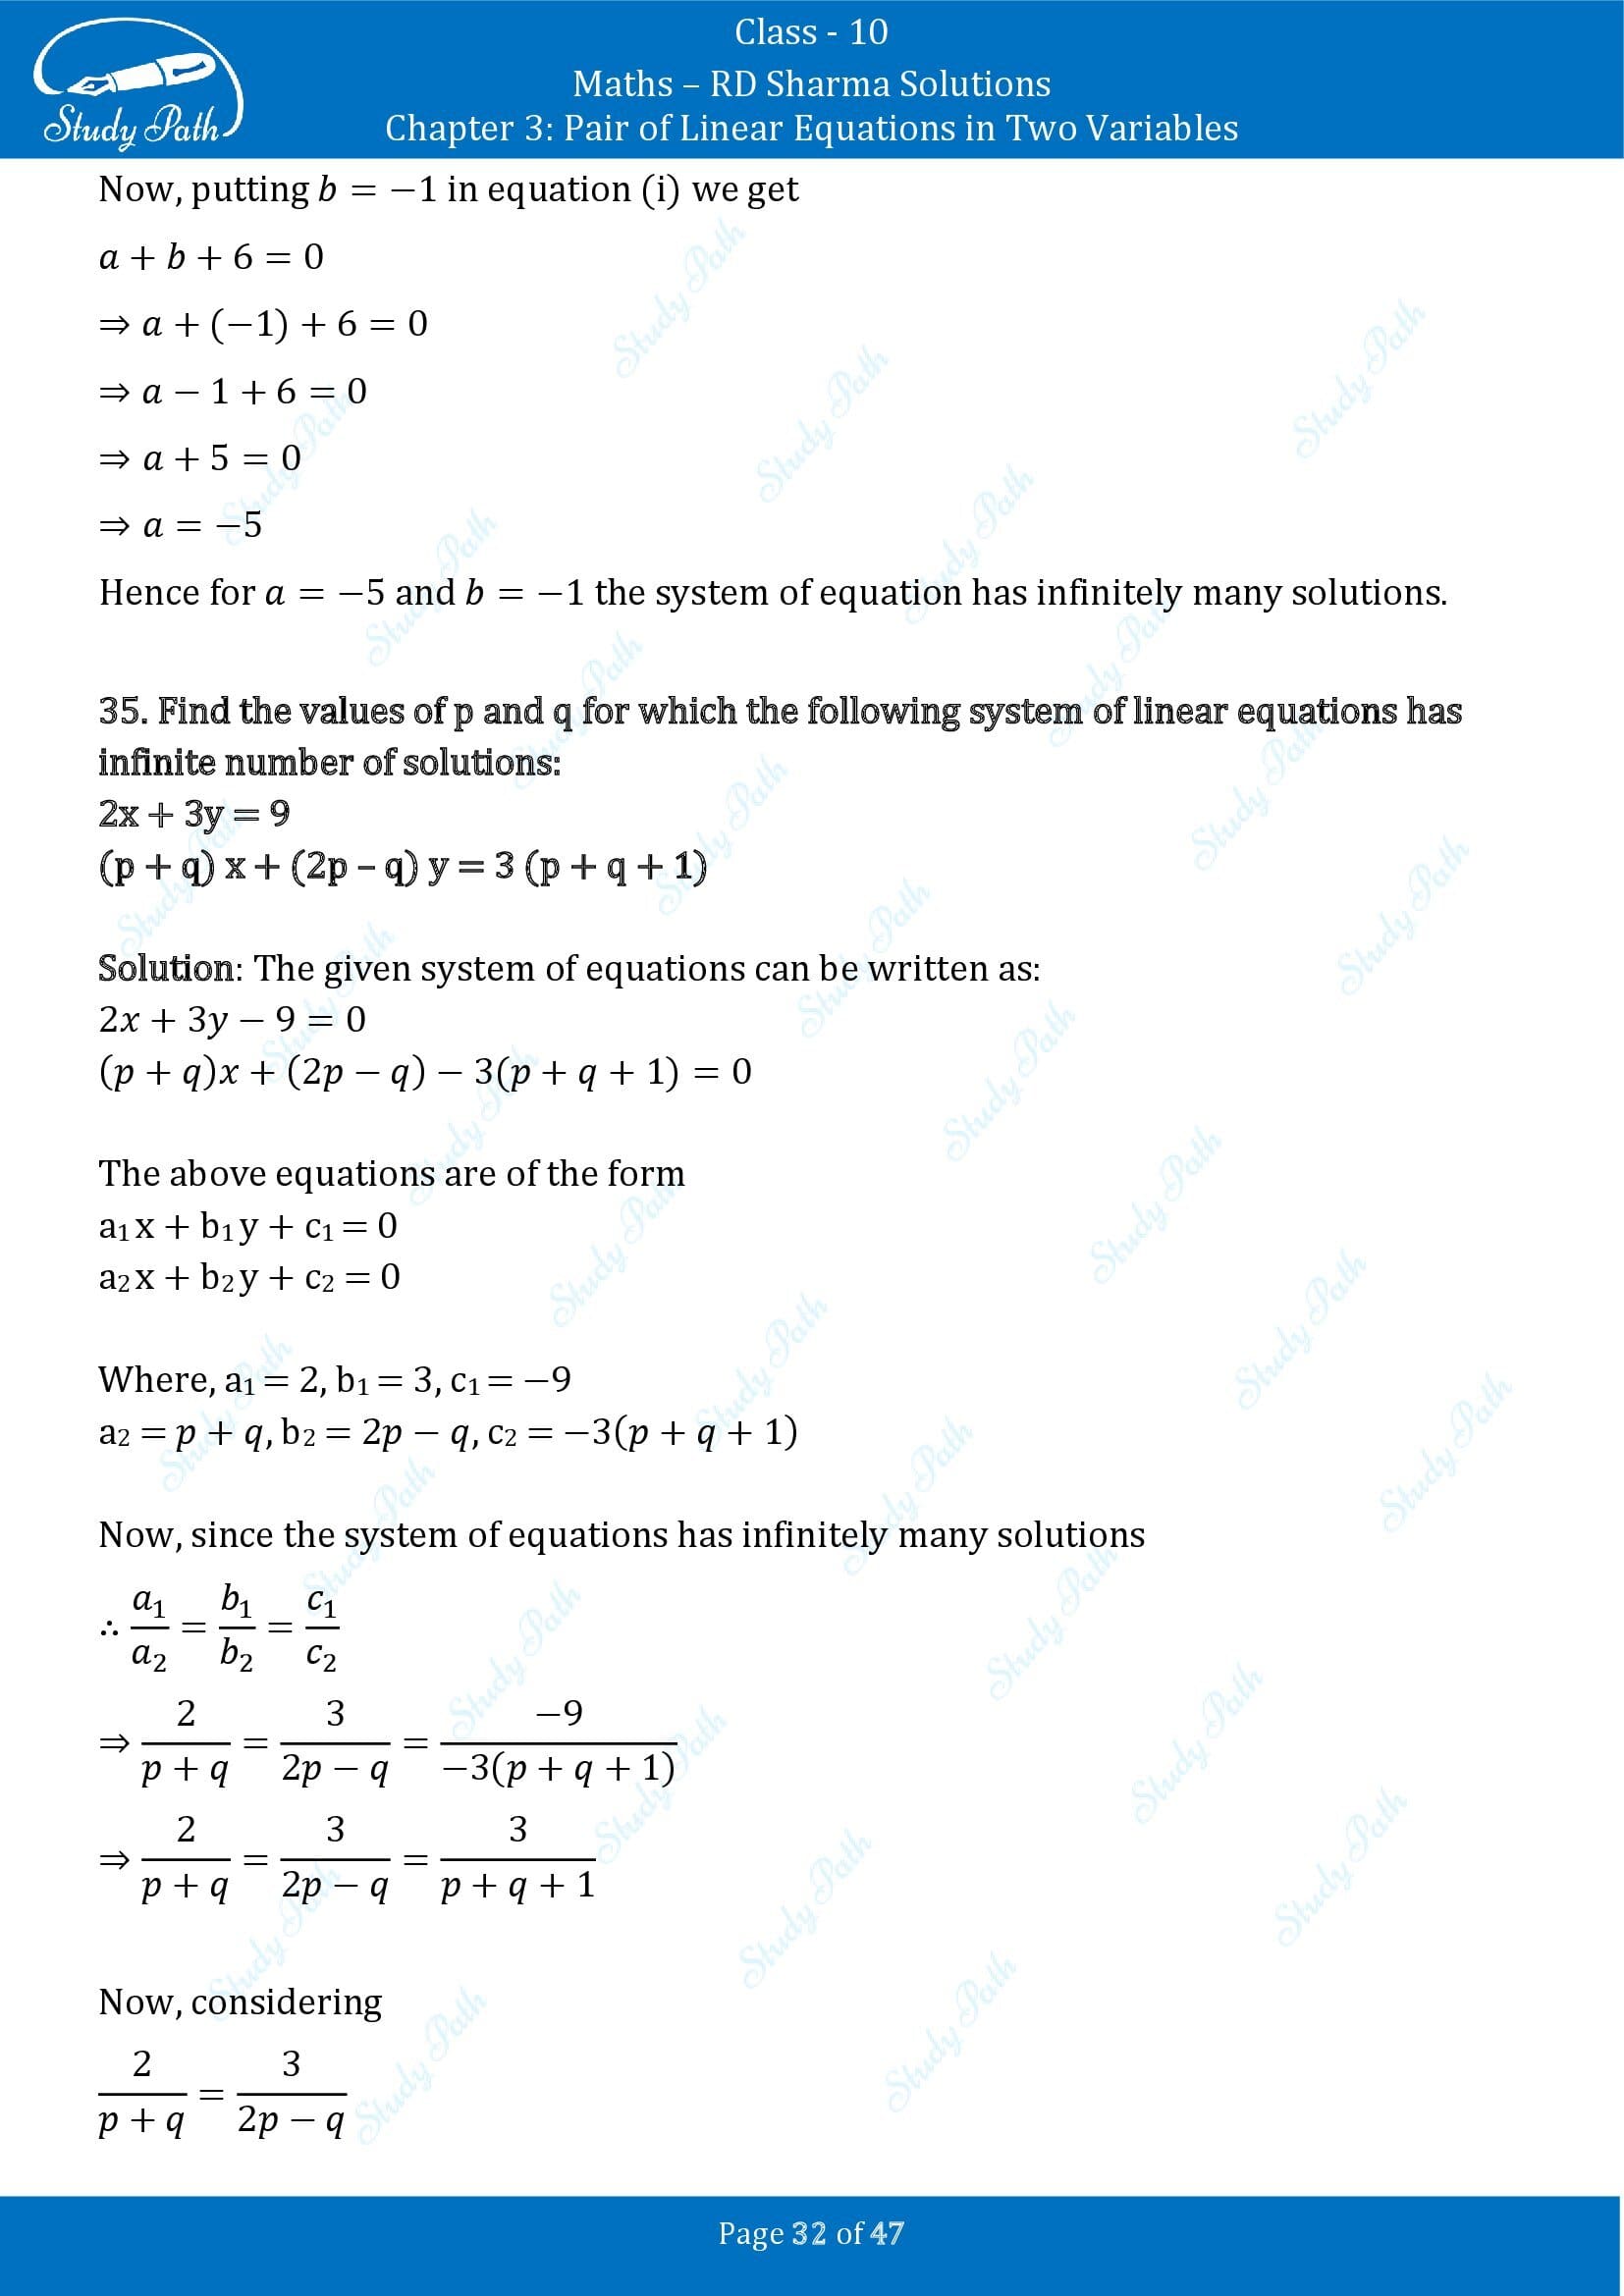 RD Sharma Solutions Class 10 Chapter 3 Pair of Linear Equations in Two Variables Exercise 3.5 00032